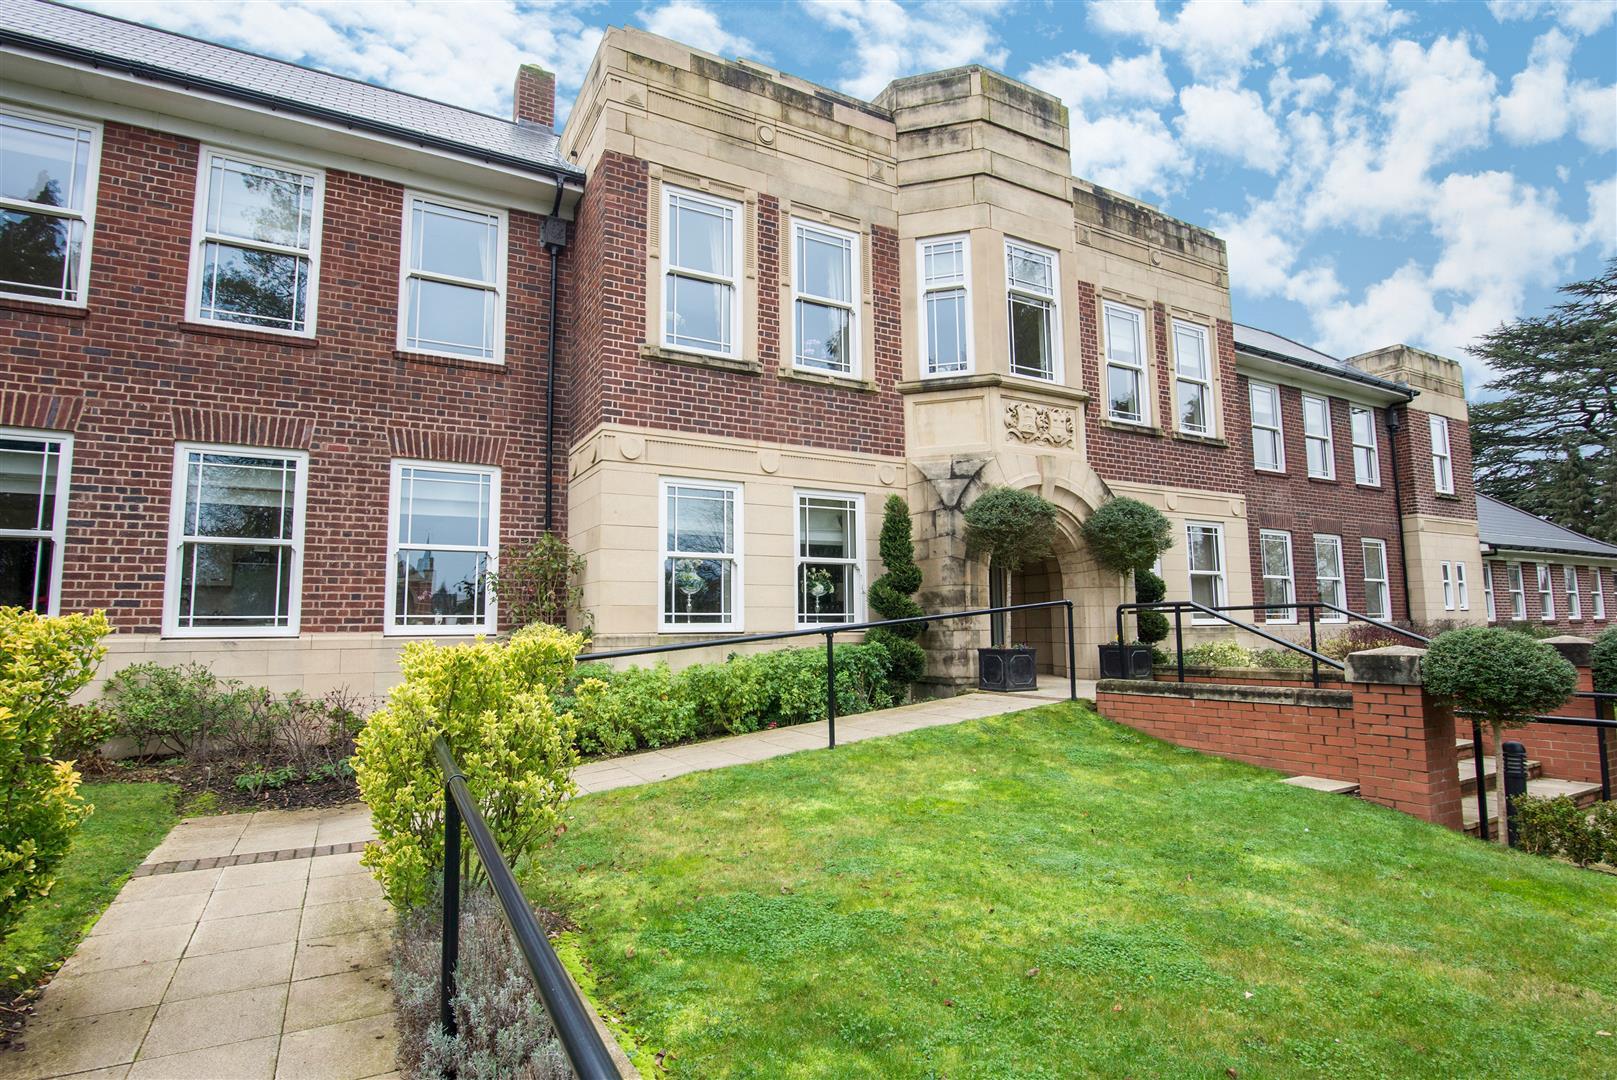 Francis Court, Barbourne Road, Worcester, Worcestershire, WR1 1RP